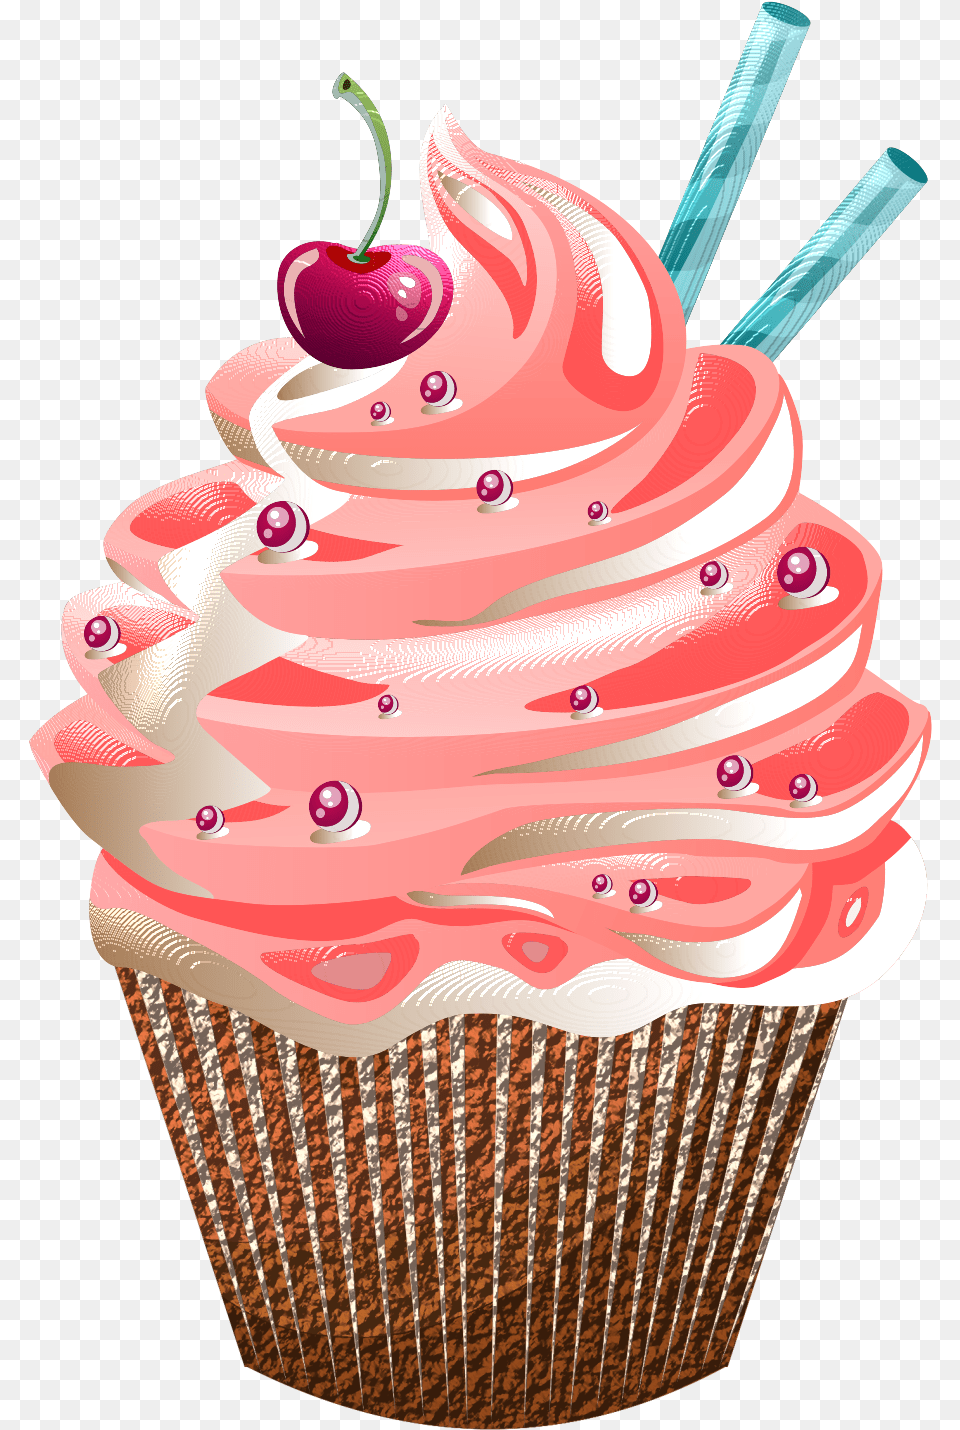 Cupcake Cakes Bakery Clip Art Cup Cakes Transparent Background, Cake, Cream, Dessert, Food Png Image